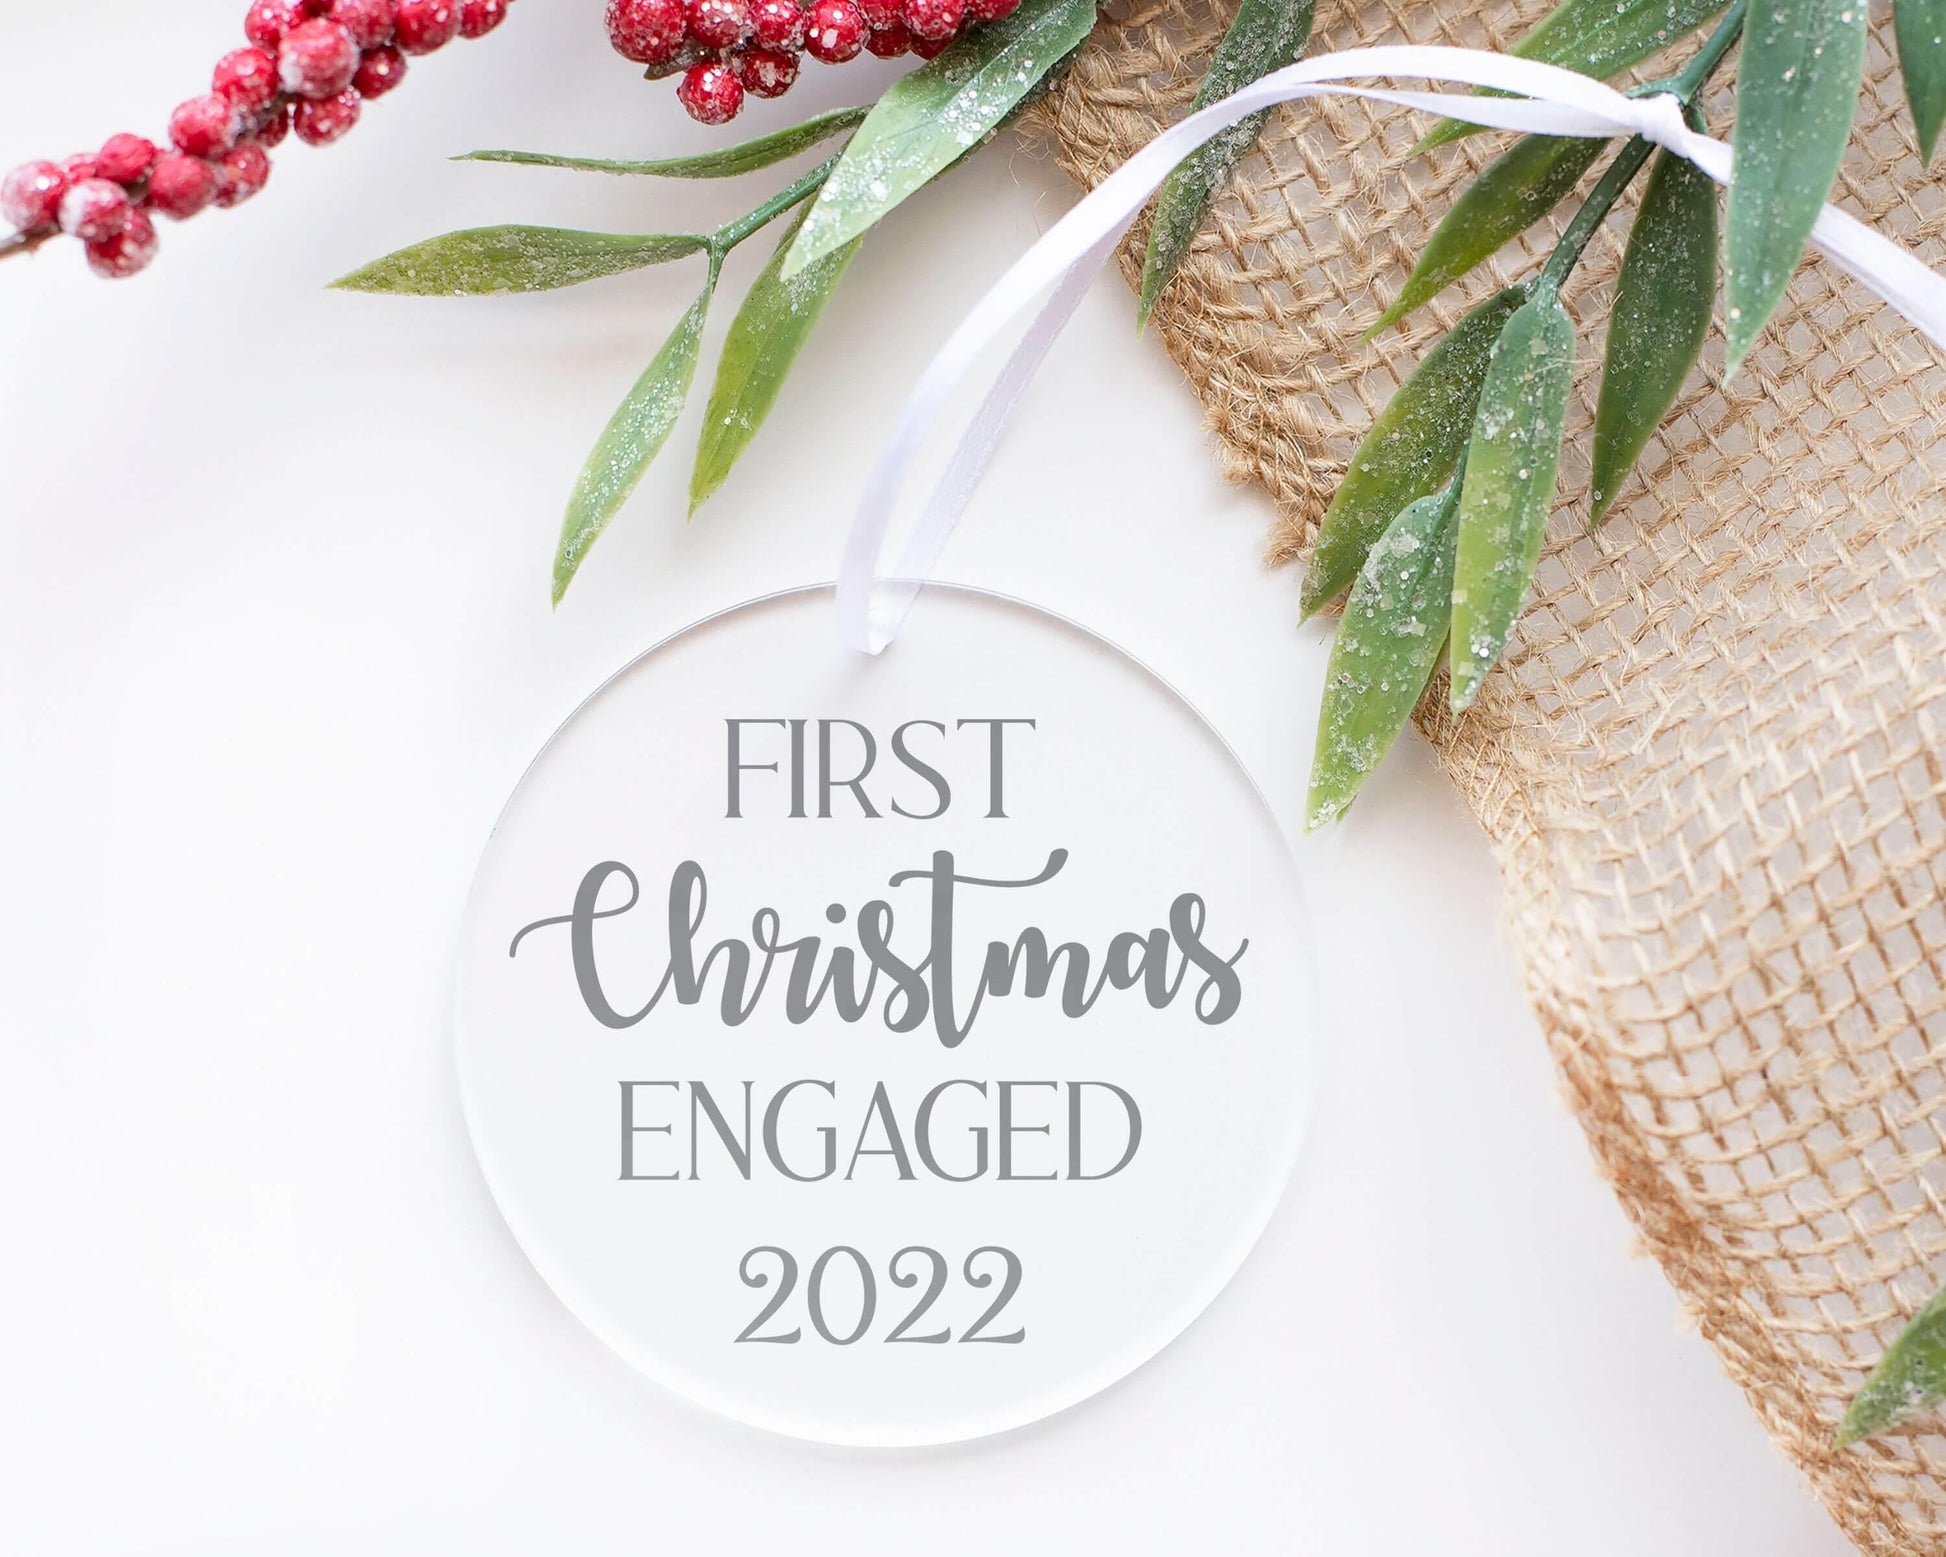 First Christmas Engaged 2022 Acrylic Ornament - Crystal Rose Design Co.